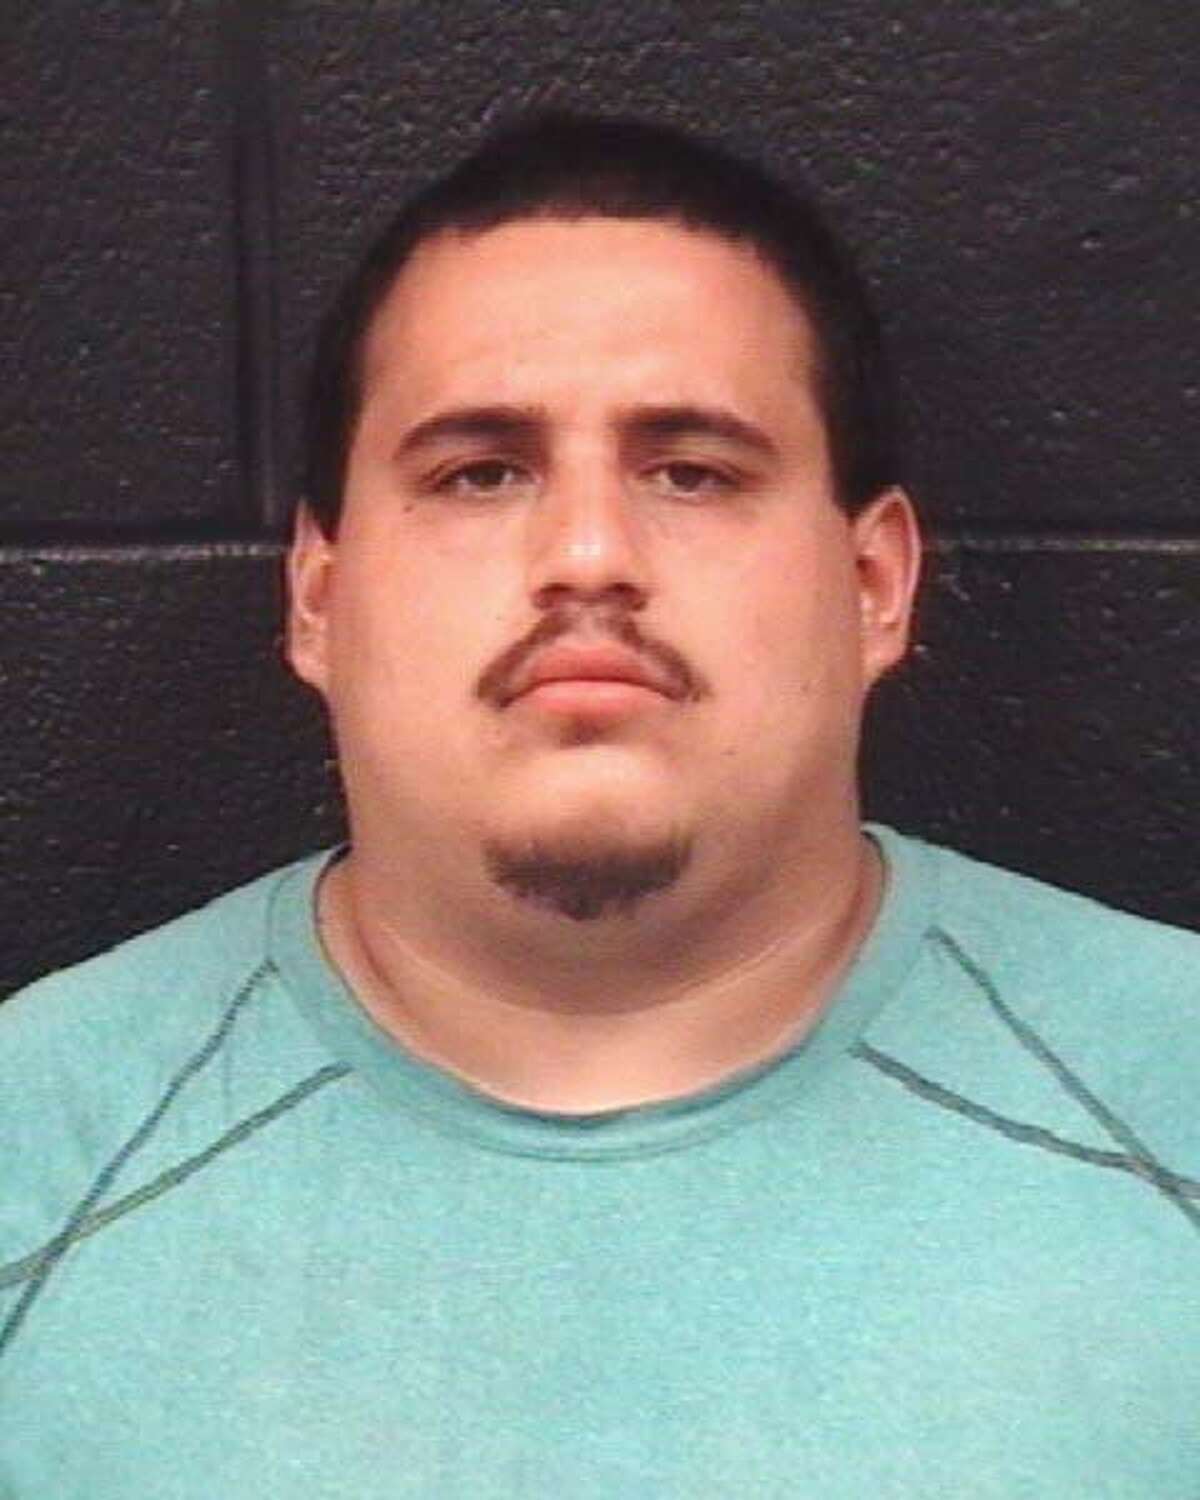 Mario Angel Gonzalez, 24, was arrested on a murder charge by Laredo police.